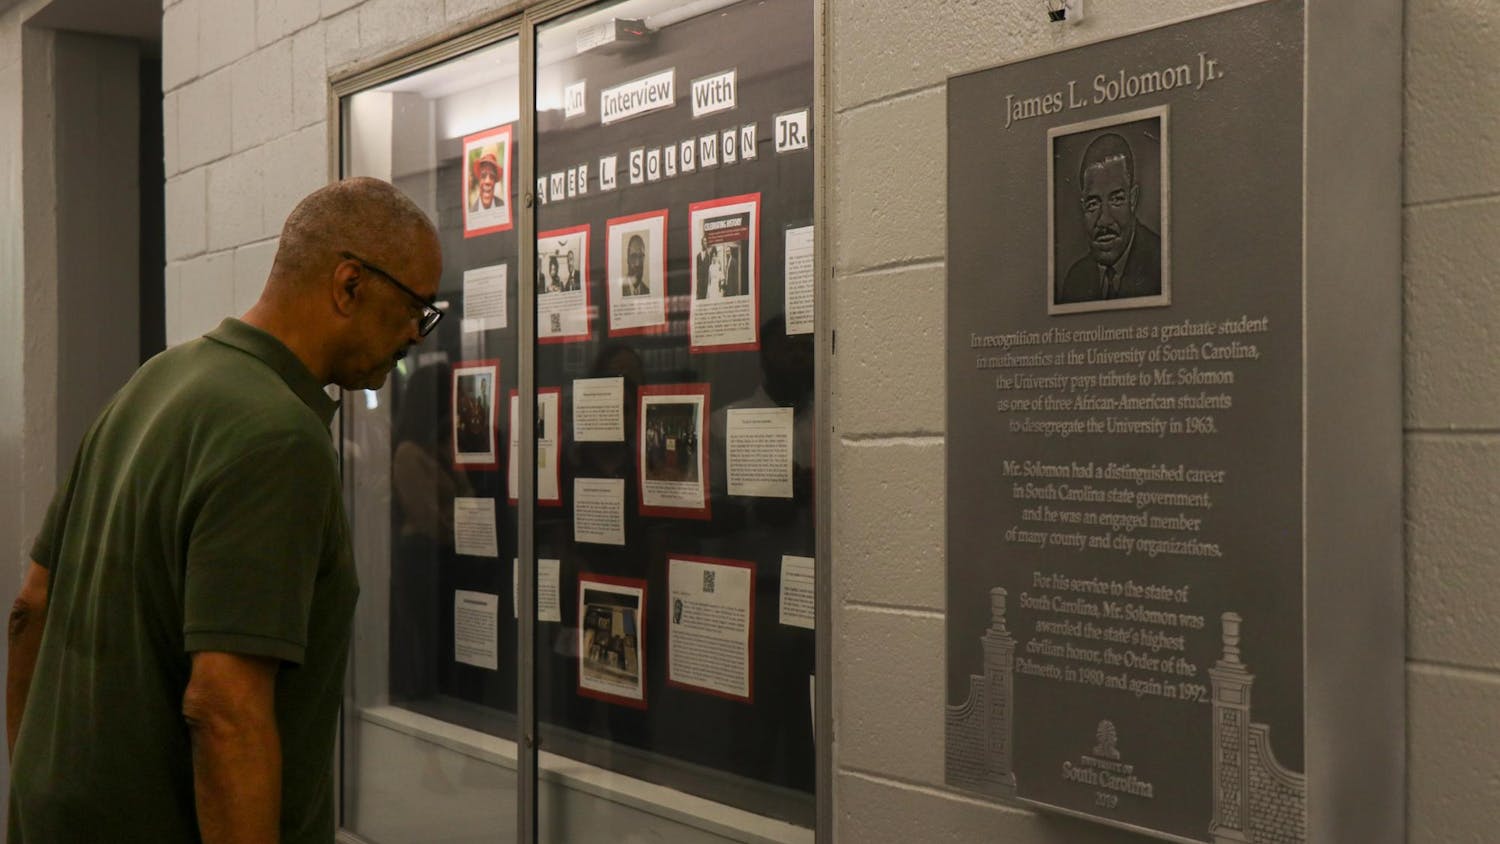 A person reads excerpts of an interview with James L. Solomon Jr. that are on display in LeConte College on Sept. 11, 2023. The College of Arts and Sciences unveiled a plaque in honor of Solomon Jr. four years after it was completed. The delay was caused by COVID-19 and construction.